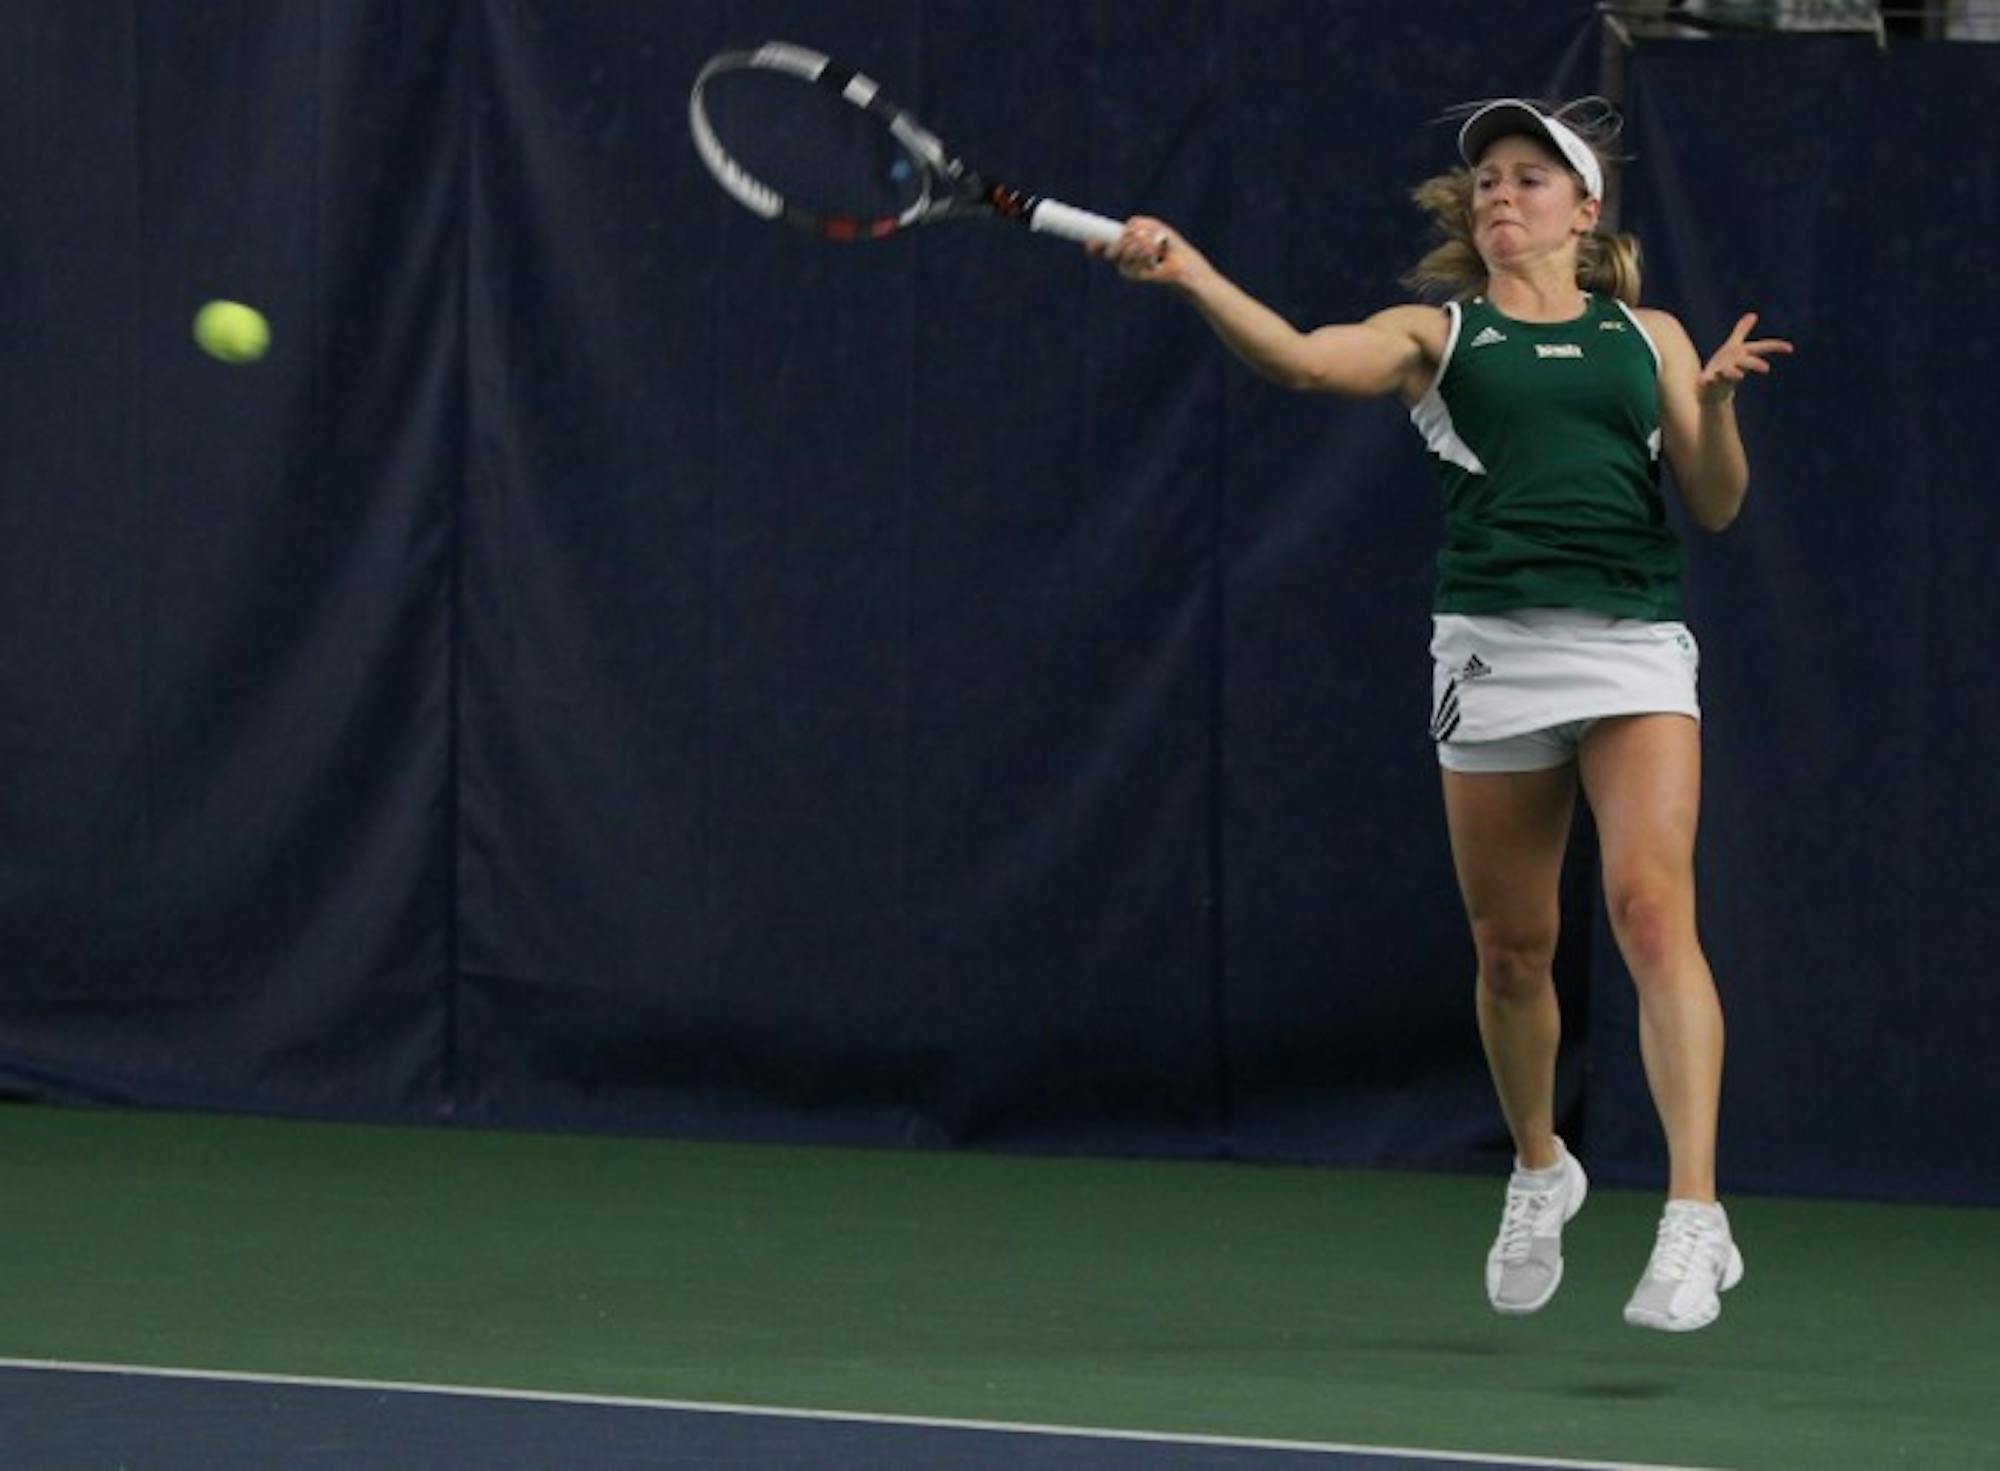 Irish sophomore Mary Closs hits a forehand during Notre Dame’s 4-3 loss to Georgia Tech on Feb.21, 2014 at Eck Tennis Pavilion. Closs and partner sophomore Jane Fennelly won both of their doubles matches this weekend.